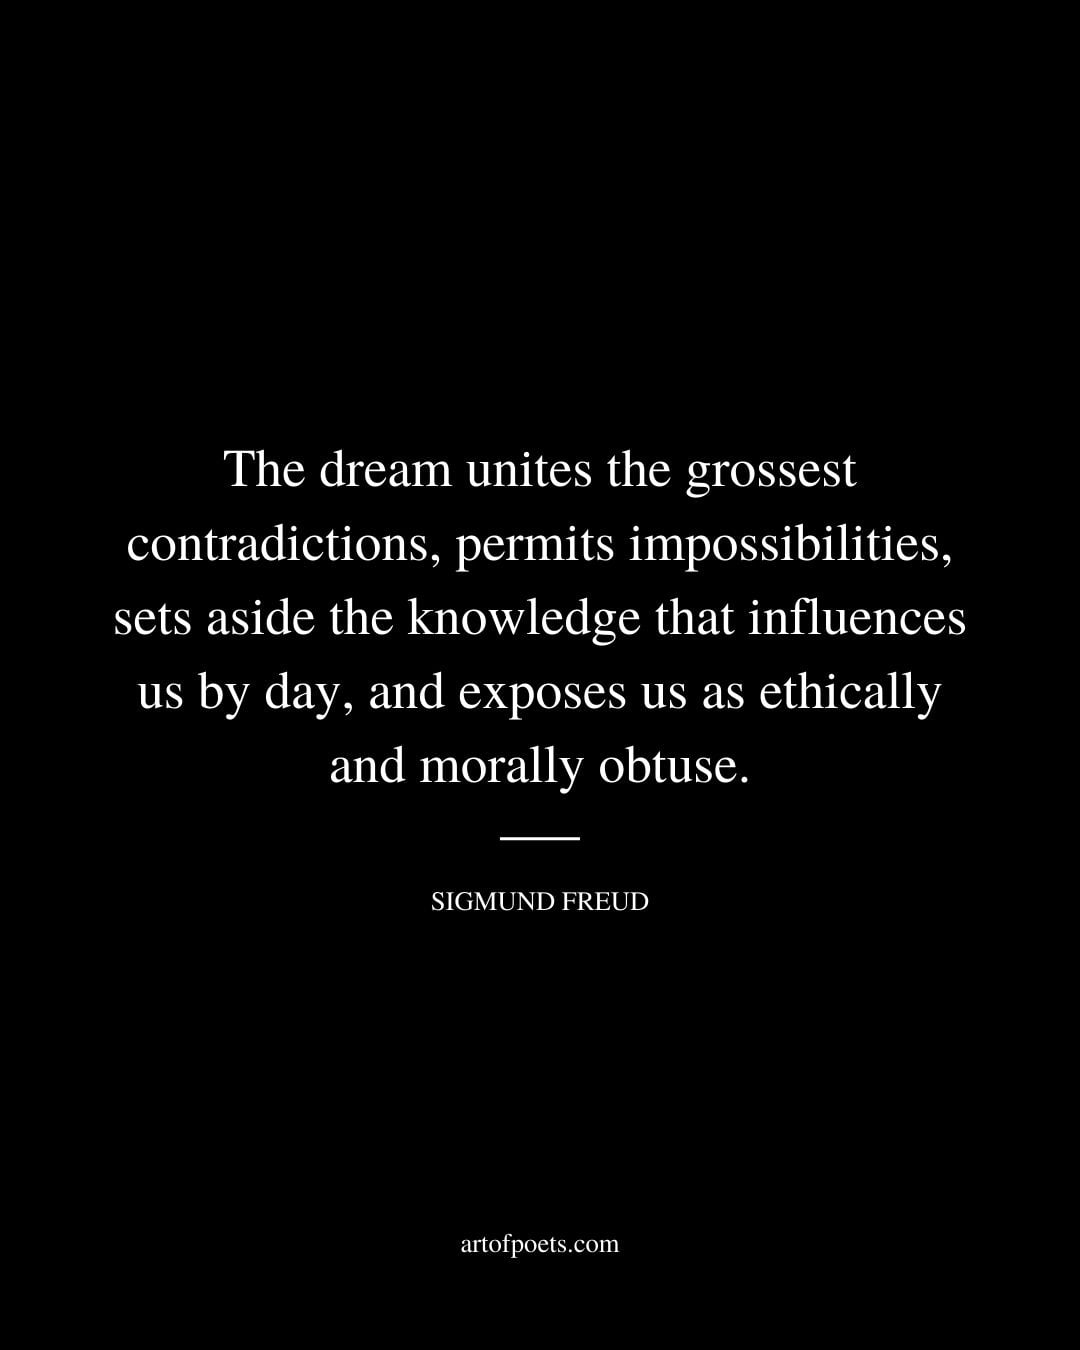 The dream unites the grossest contradictions permits impossibilities sets aside the knowledge that influences us by day